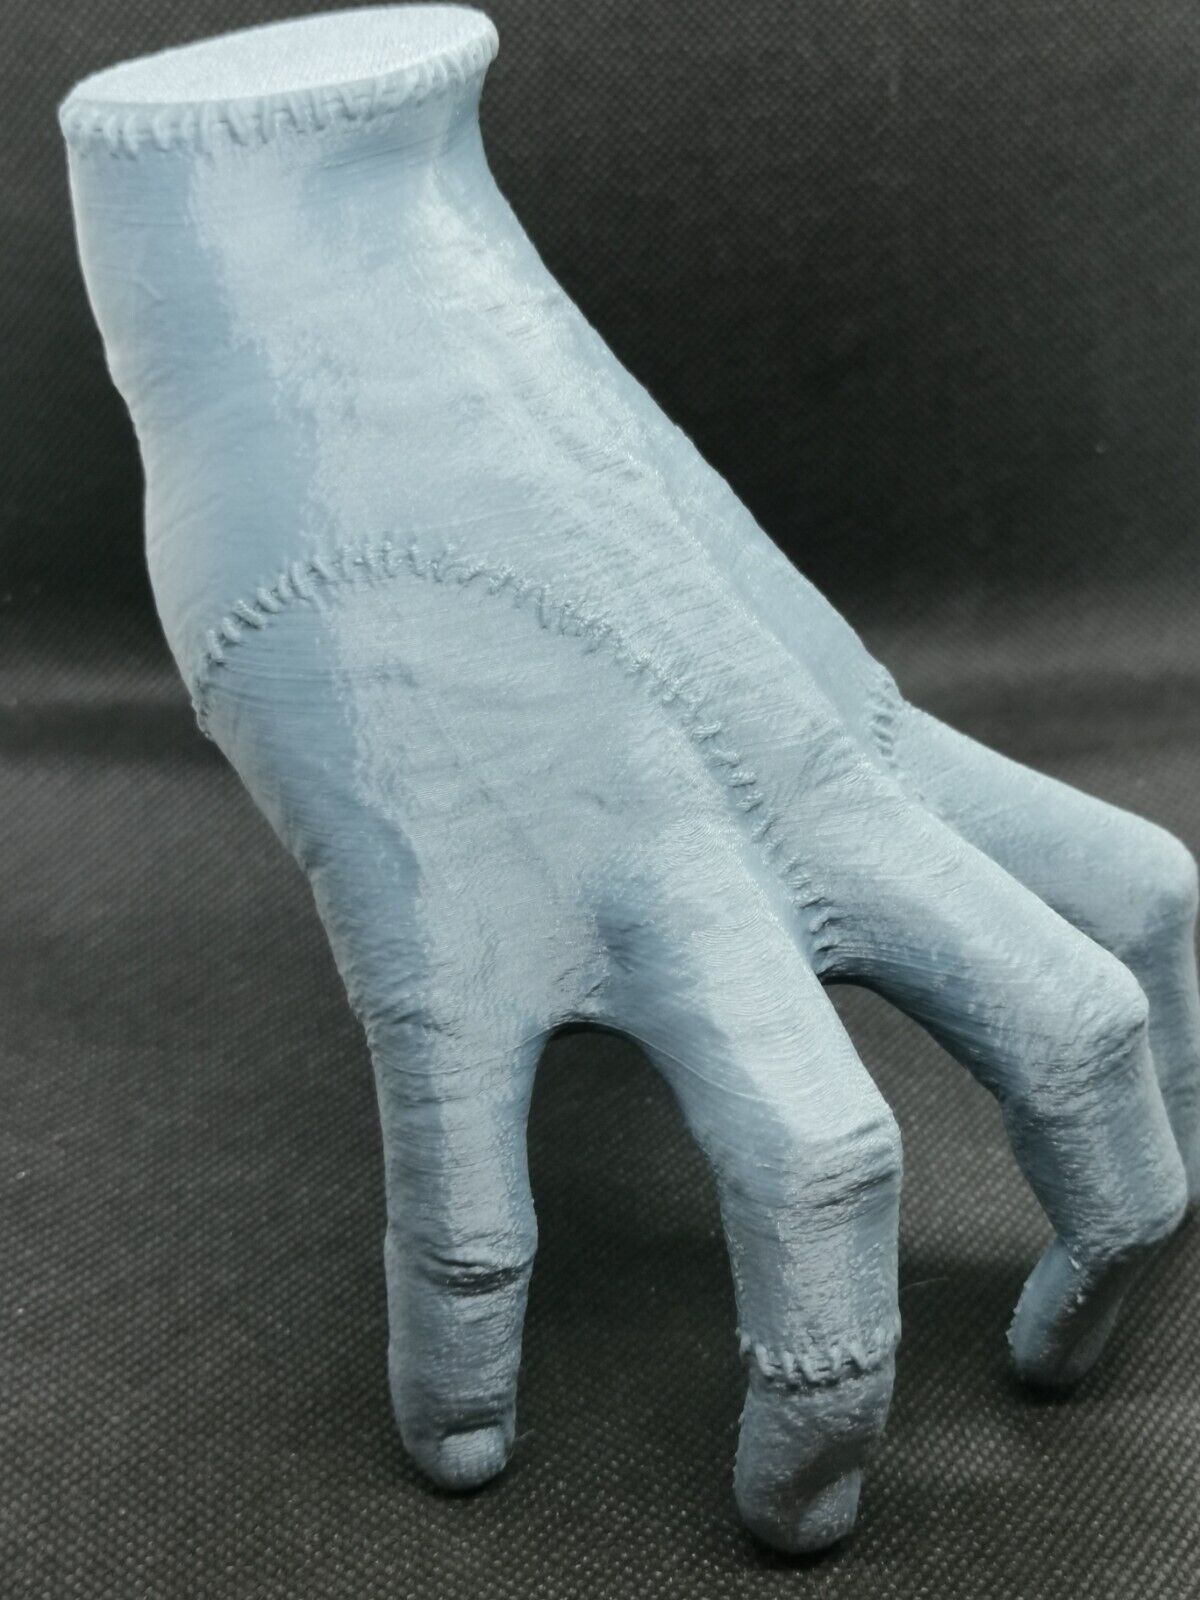 Wednesday "Thing" Hand prop from Addams Family Netflix Series (138mm)